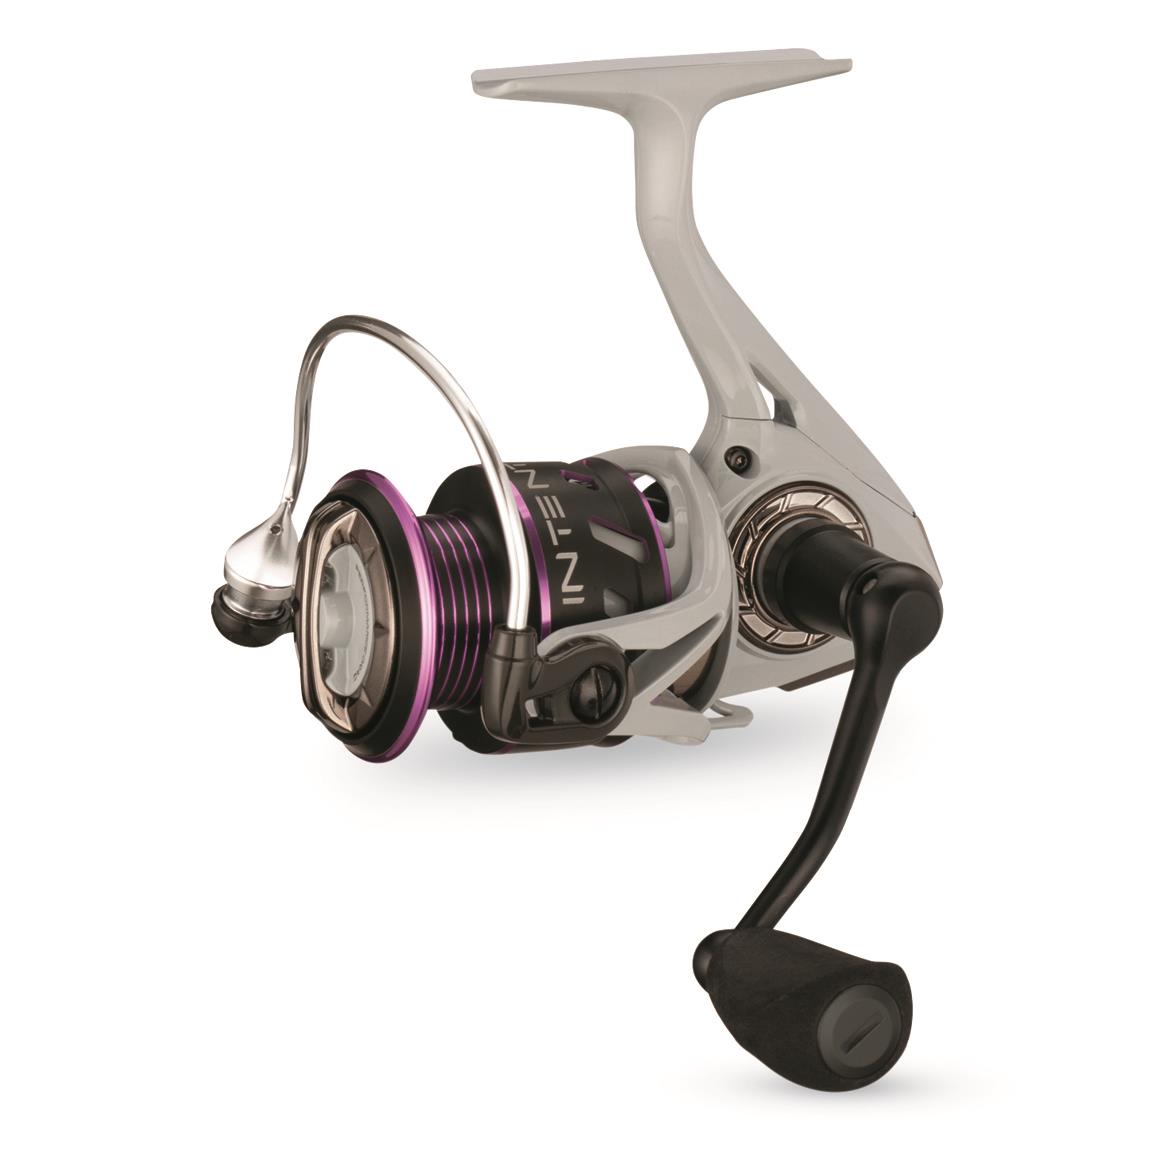 ONE3 Fishing Origin A Baitcasting Reel with Defy White Rod Combo